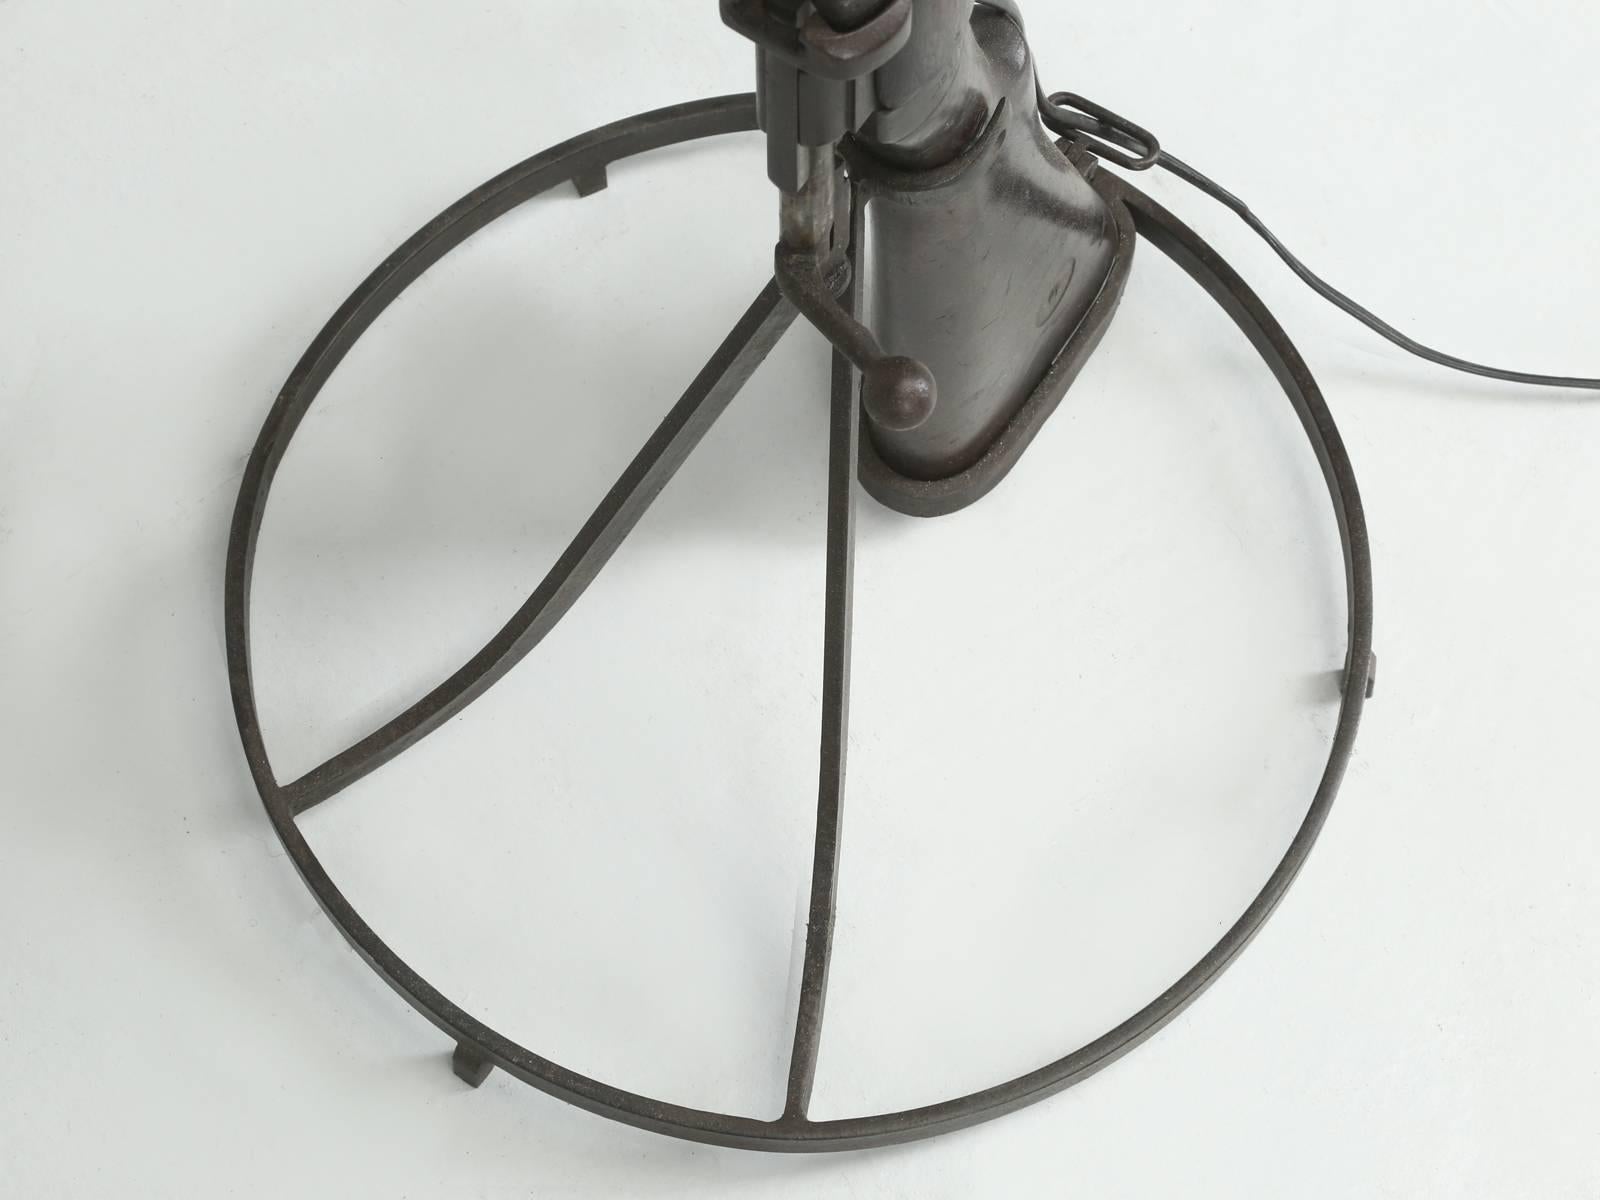 Early 20th Century Antique English Floor Lamp from a Lee-Enfield Rifle Made by BSA, circa 1918